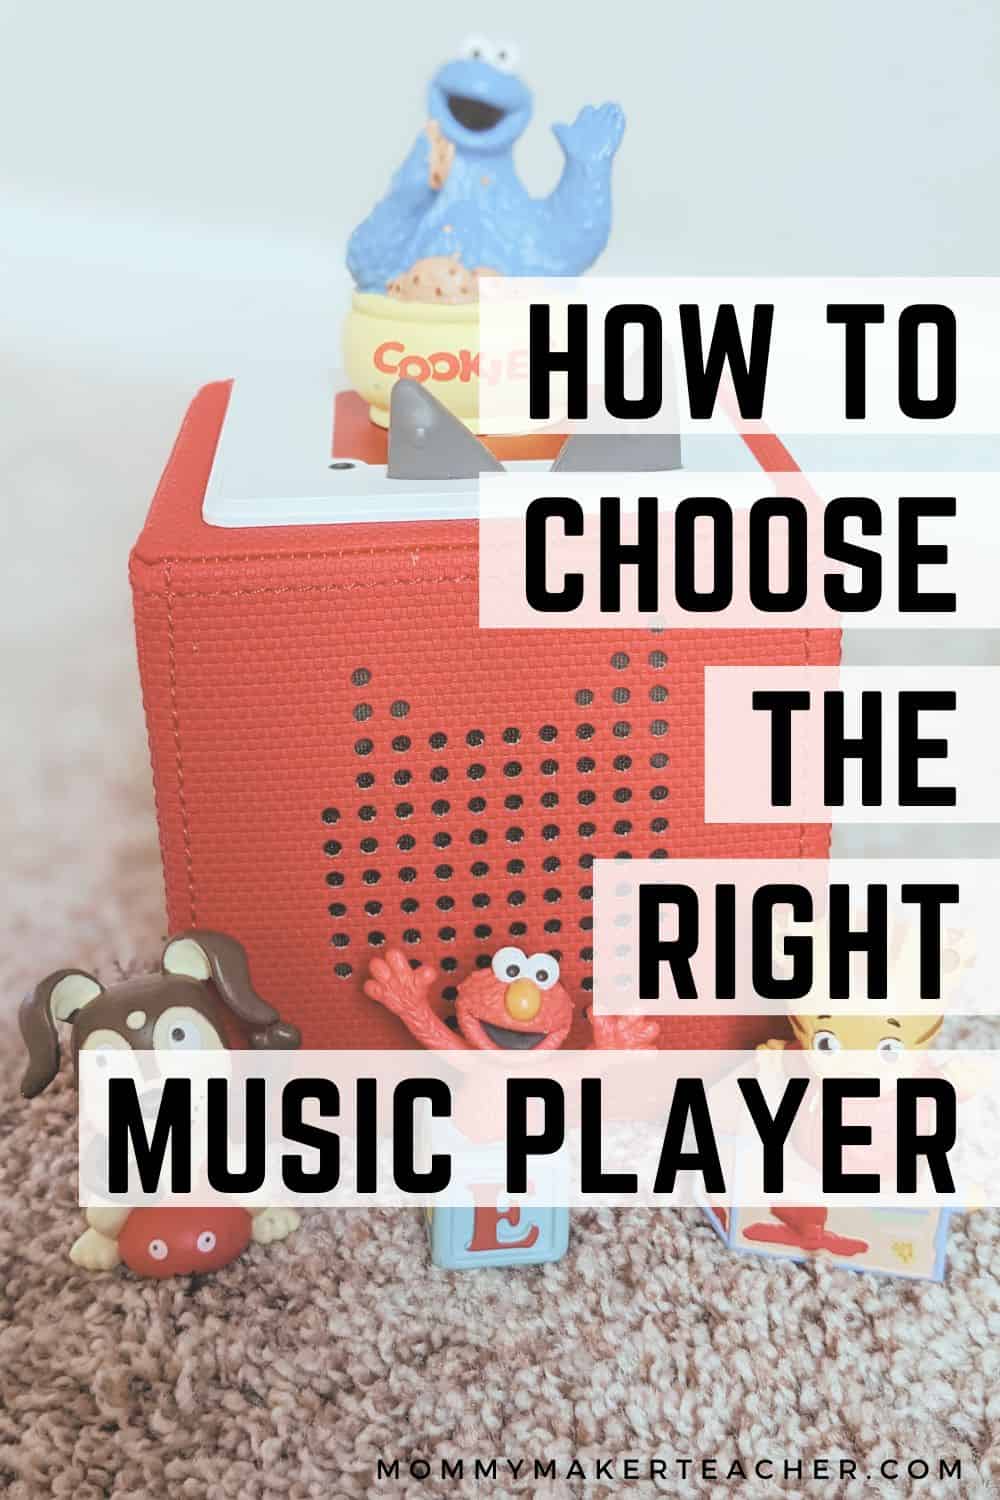 Cookie Monster character on Tonies music box. How to choose the right music player. Mommymakerteacher.com